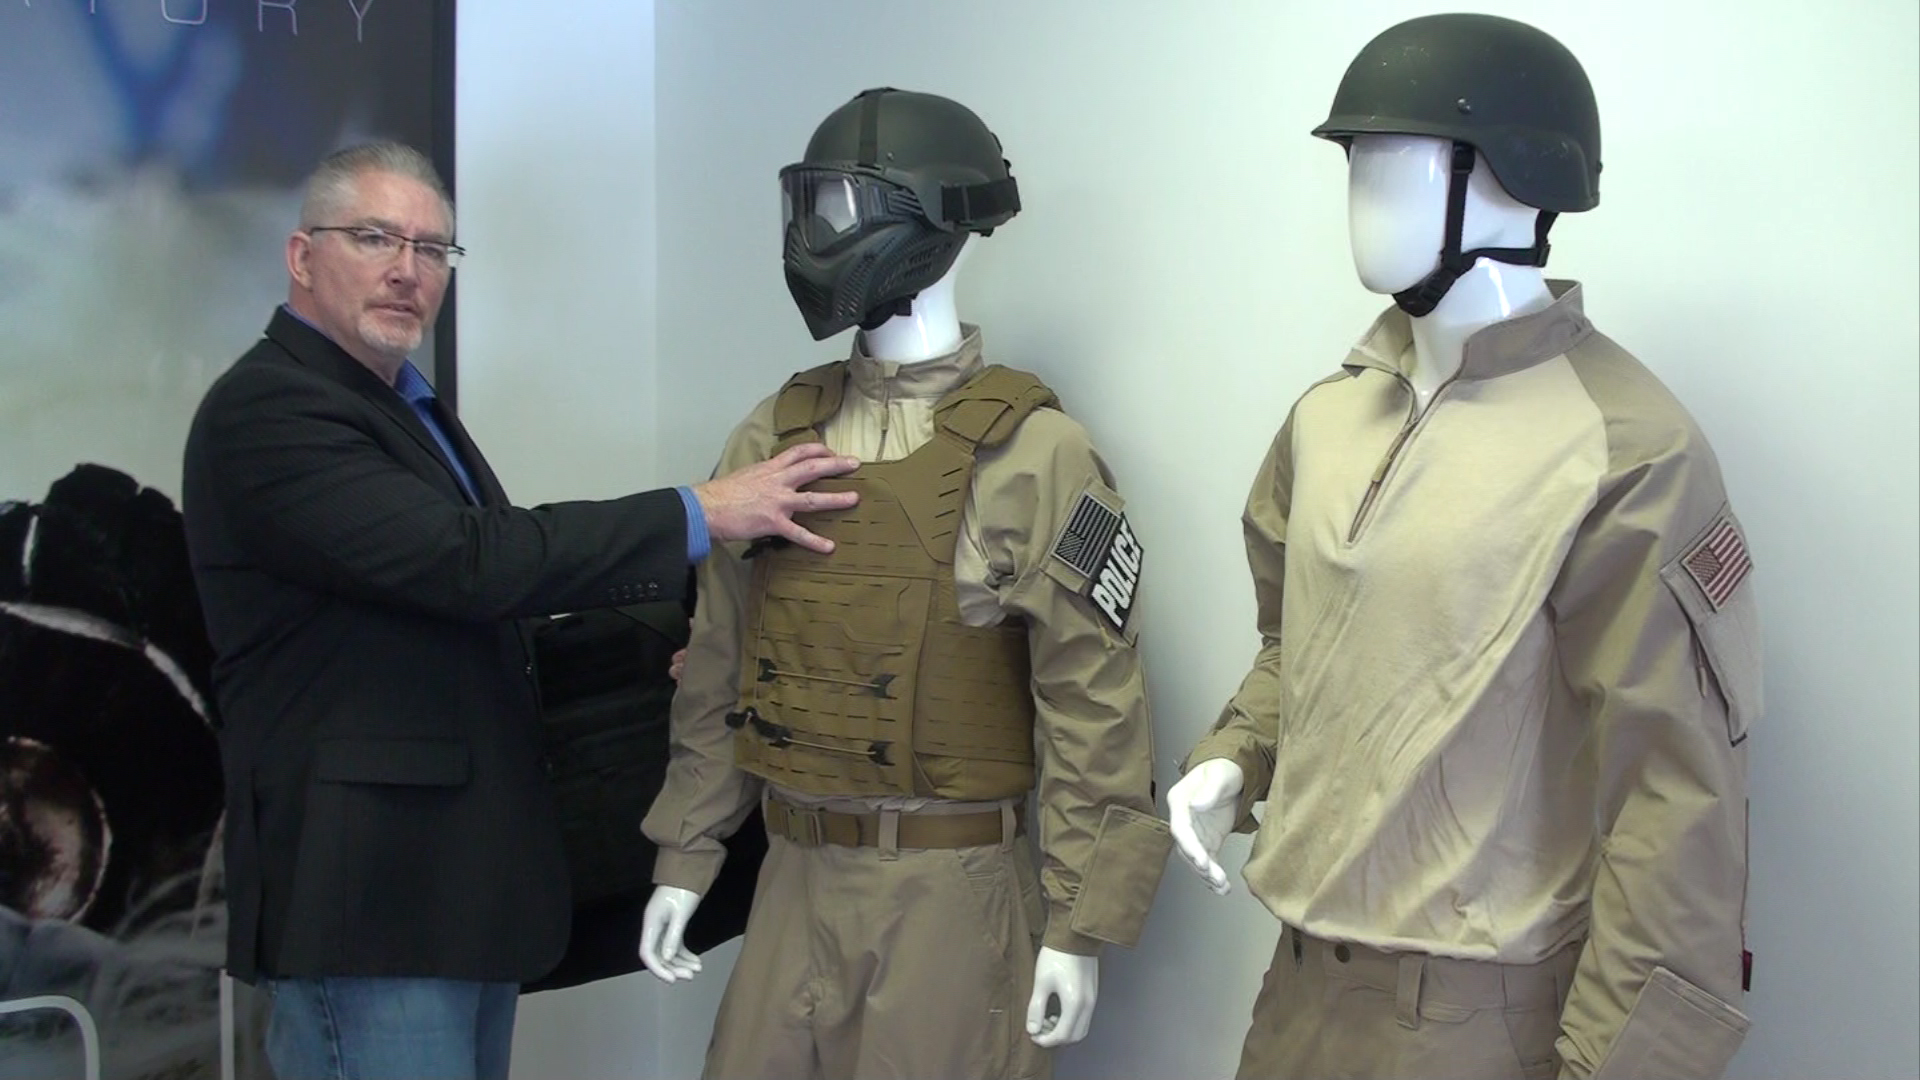 Todd Olson with two mannequins wearing Armor Express gear on his left. 